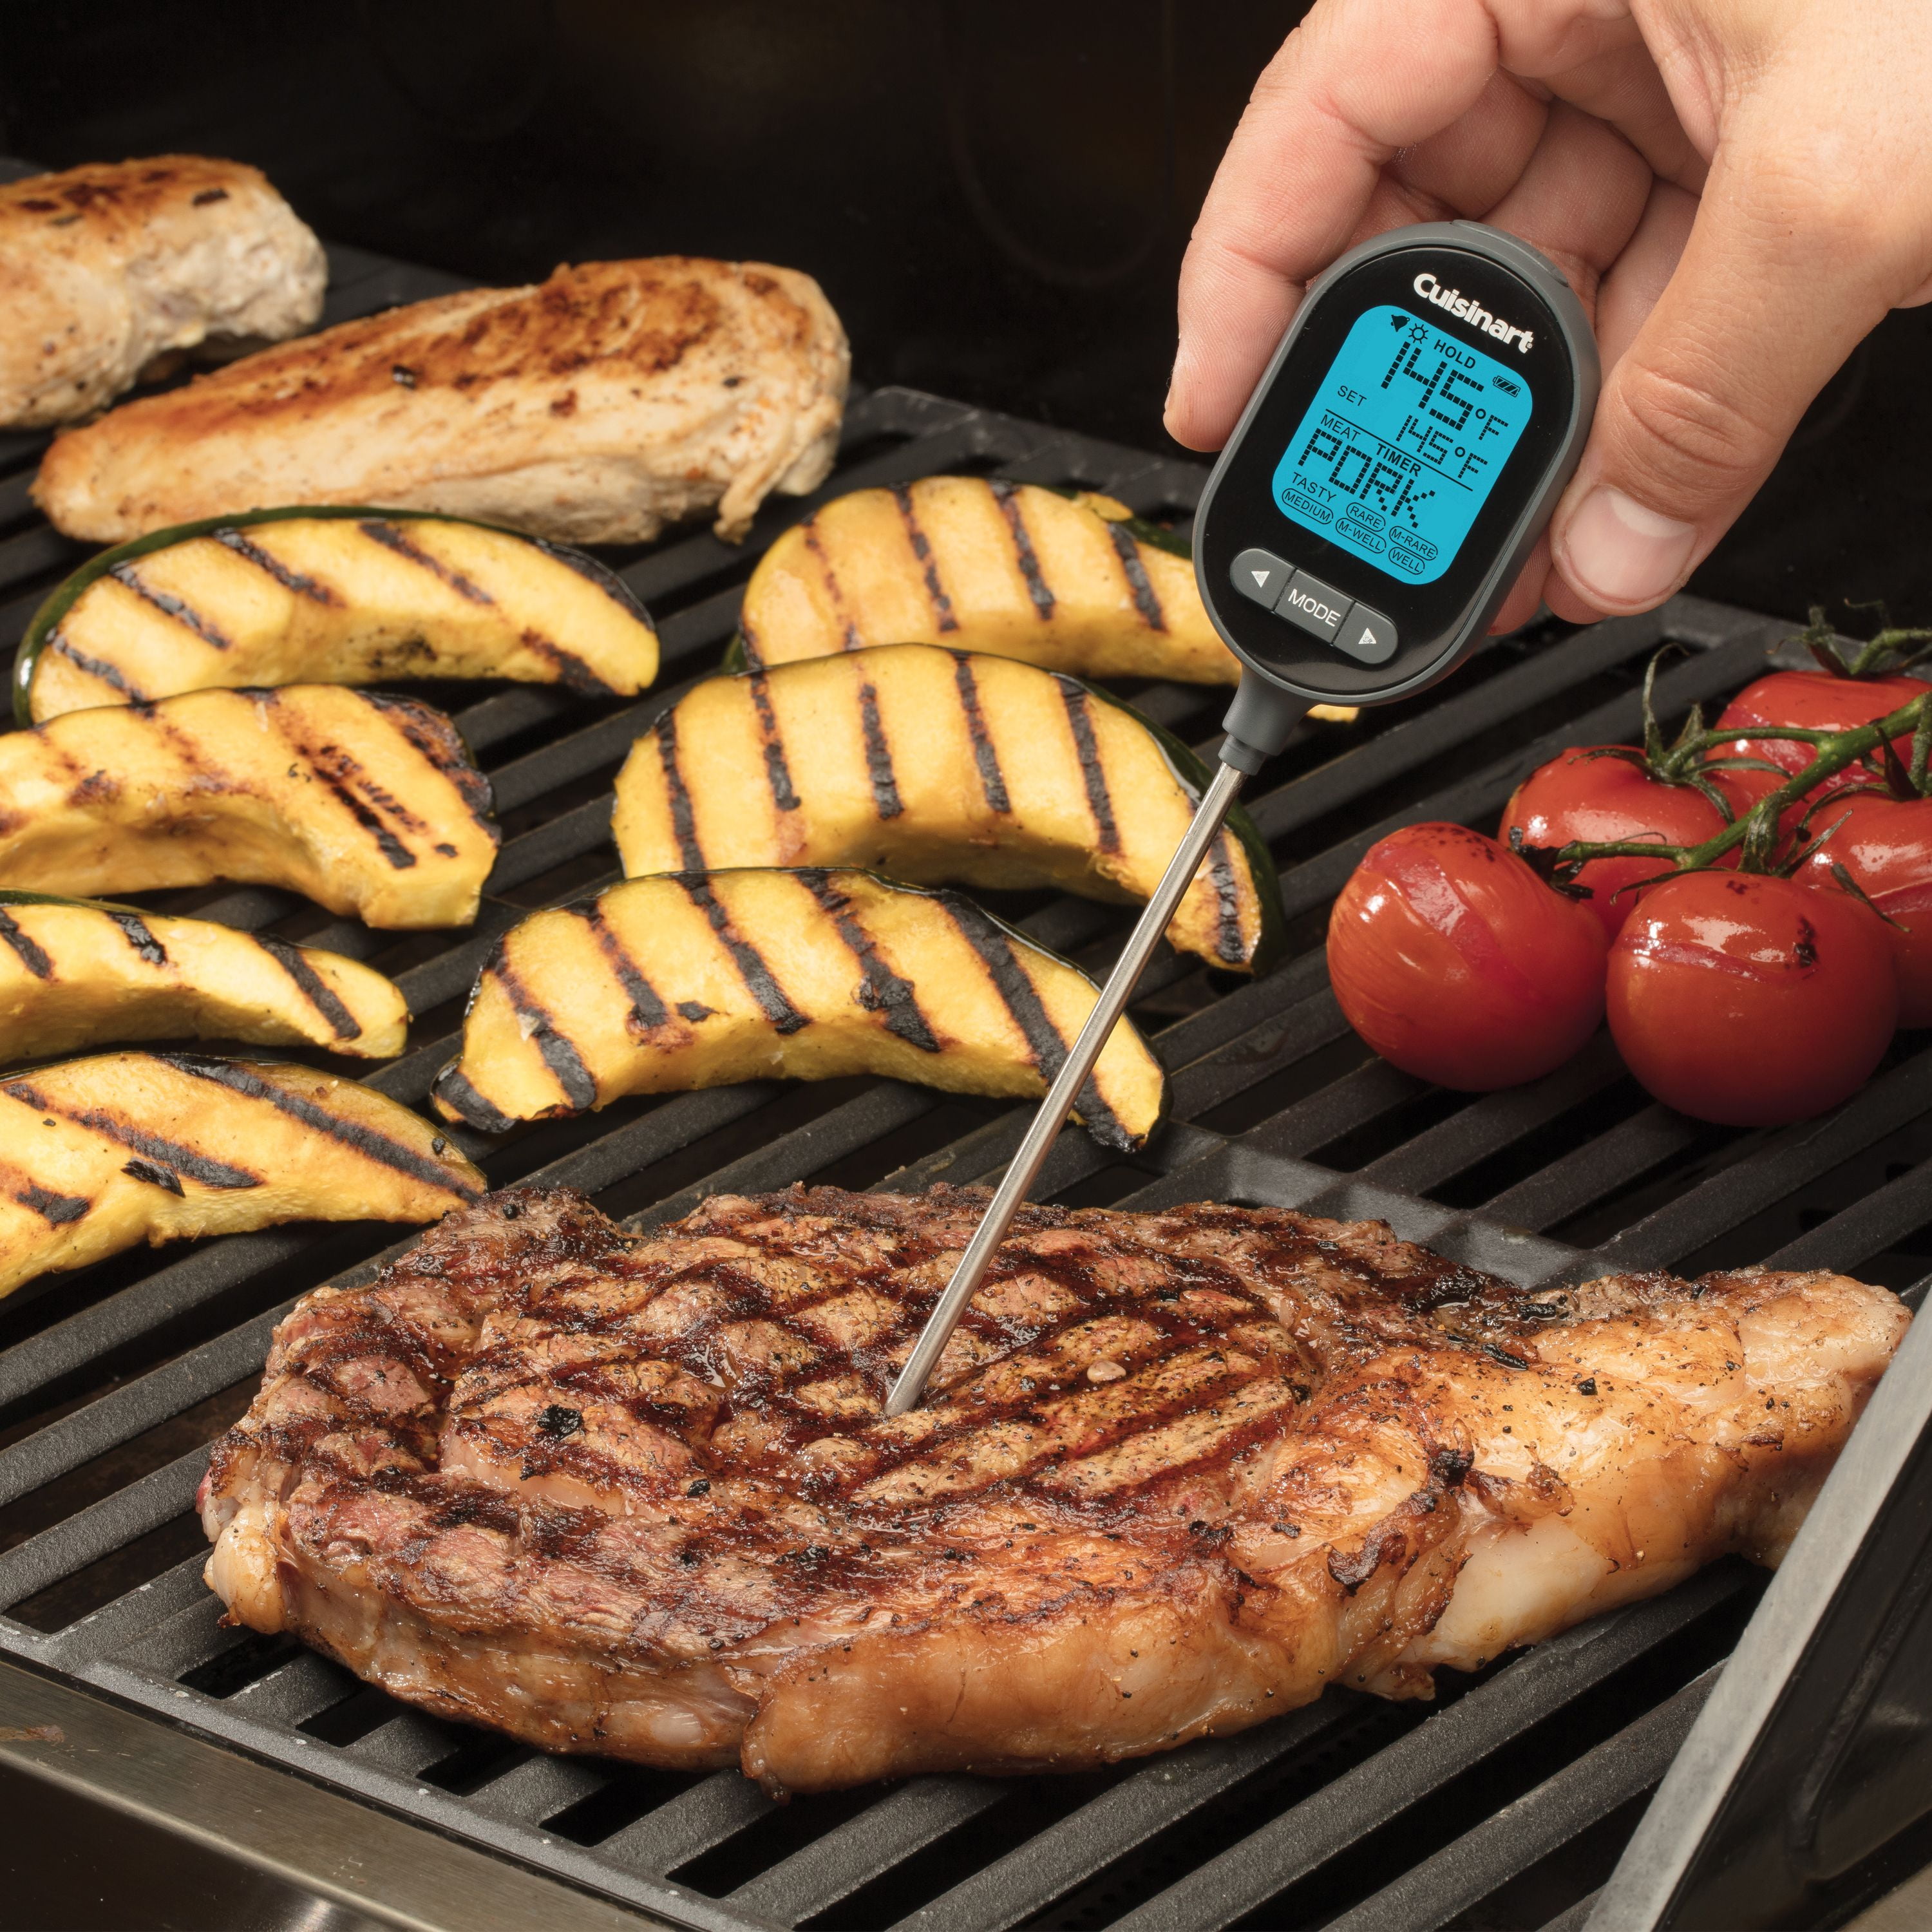 Bluetooth Easy-Connect Thermometer with 2 Meat Probes - Cuisinart CBT-100